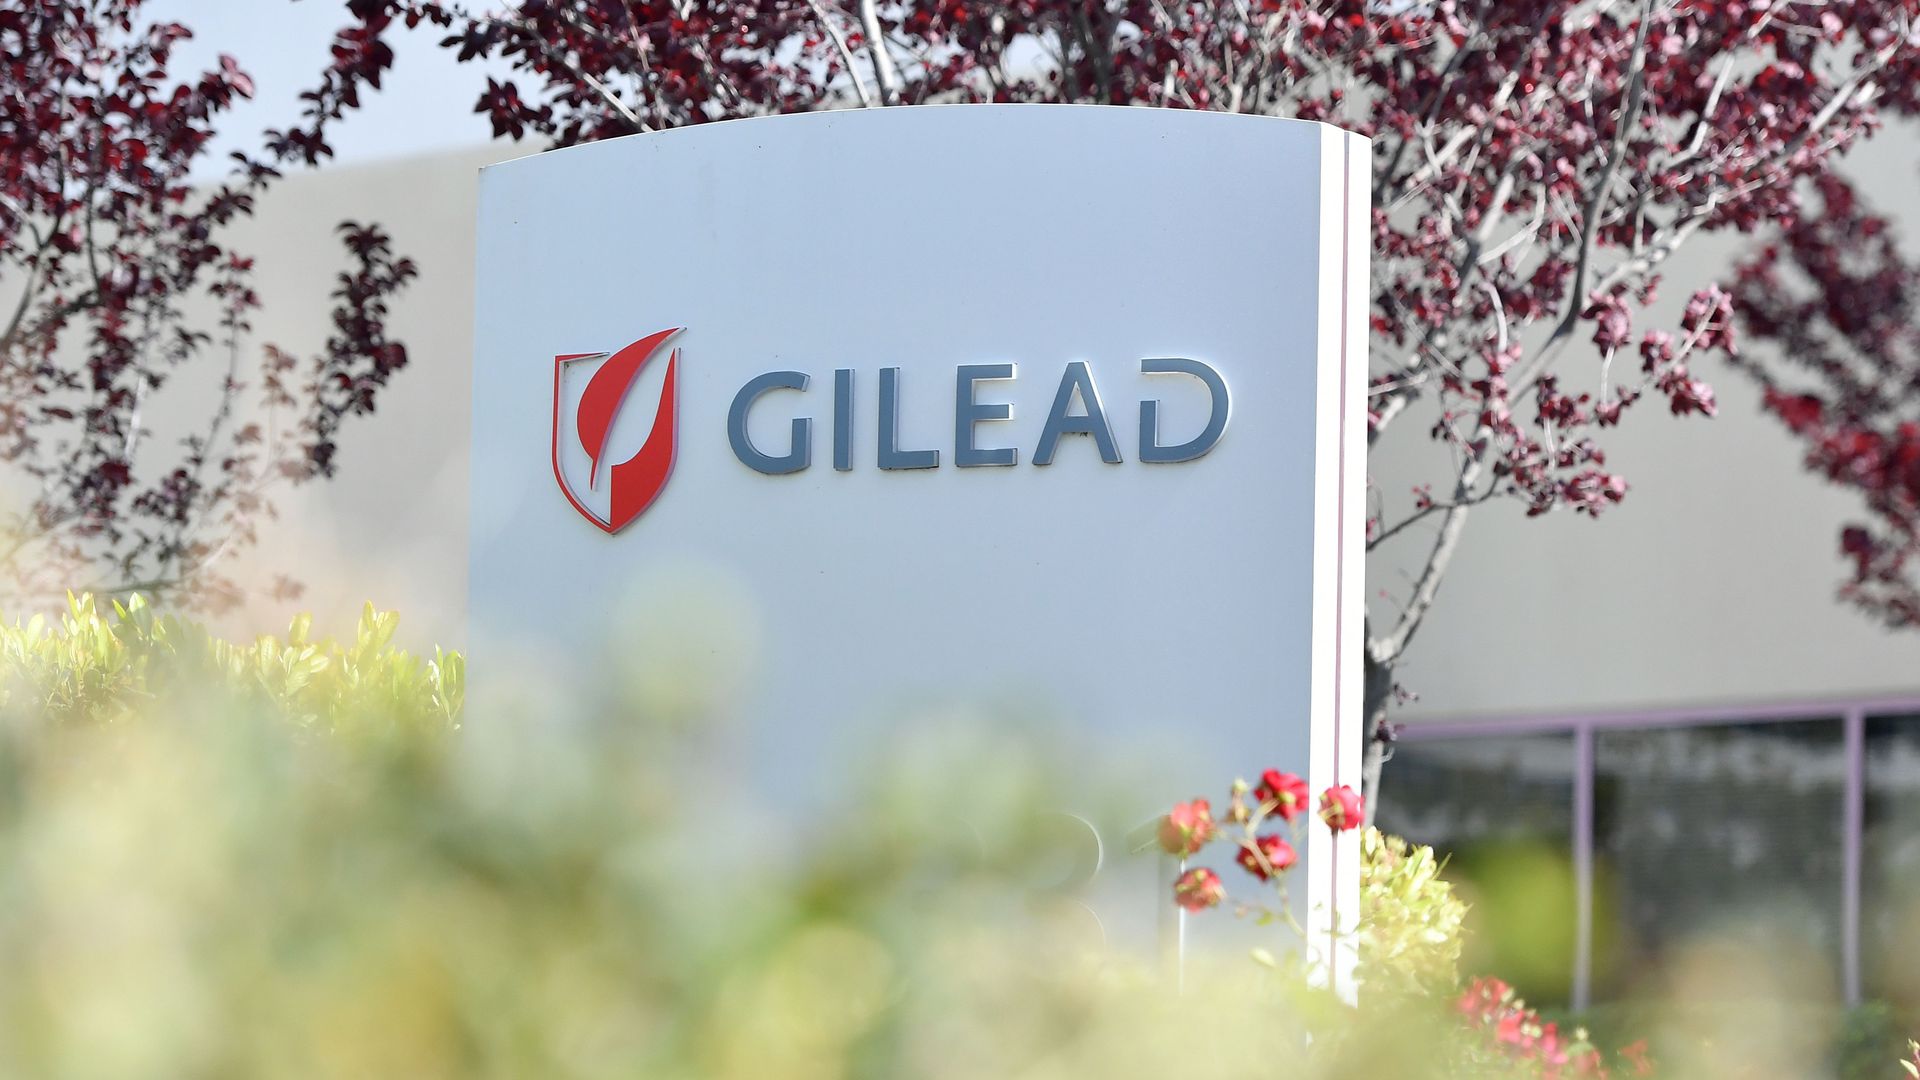 The Gilead logo on a sign surrounding by flowers and trees.